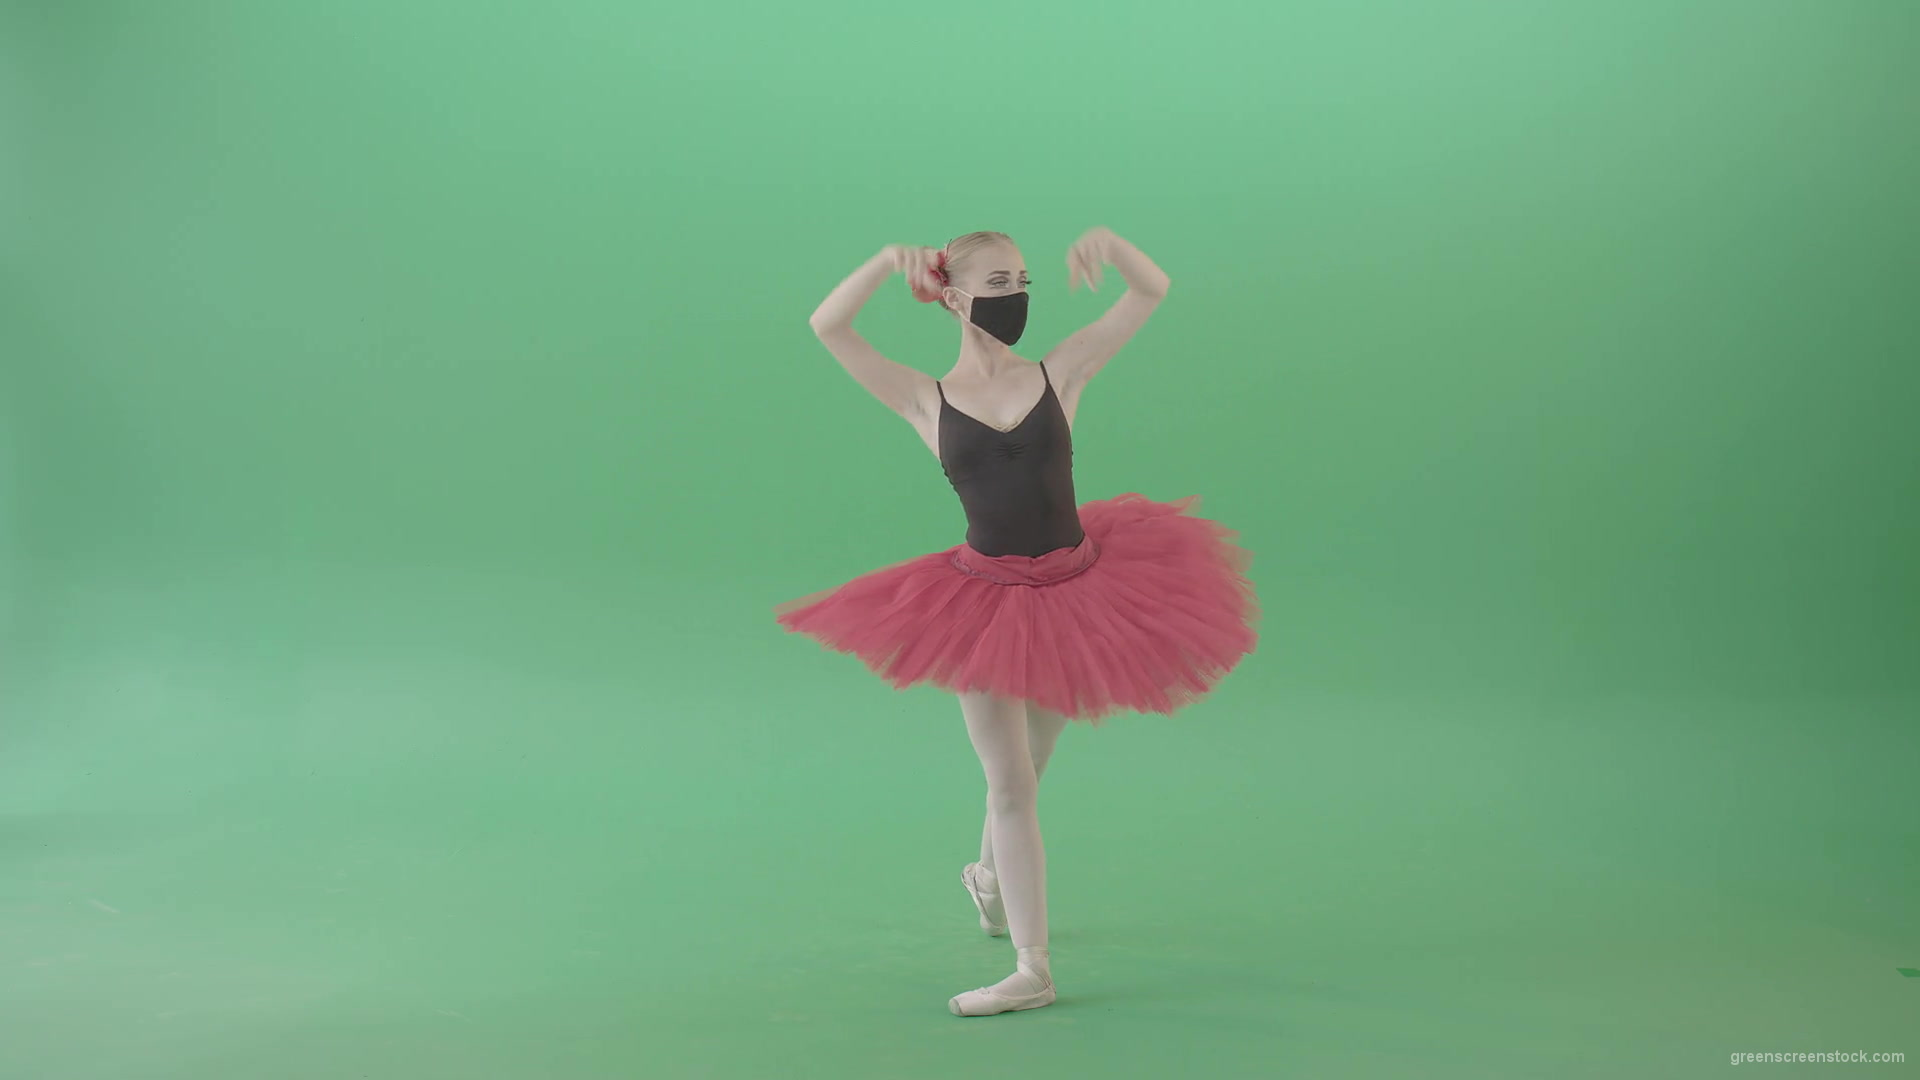 Tinny-Ballet-Dancing-Girl-Ballerina-in-red-black-dress-and-mask-welcome-people-for-awards-Green-Screen-Video-Footage-1920_009 Green Screen Stock